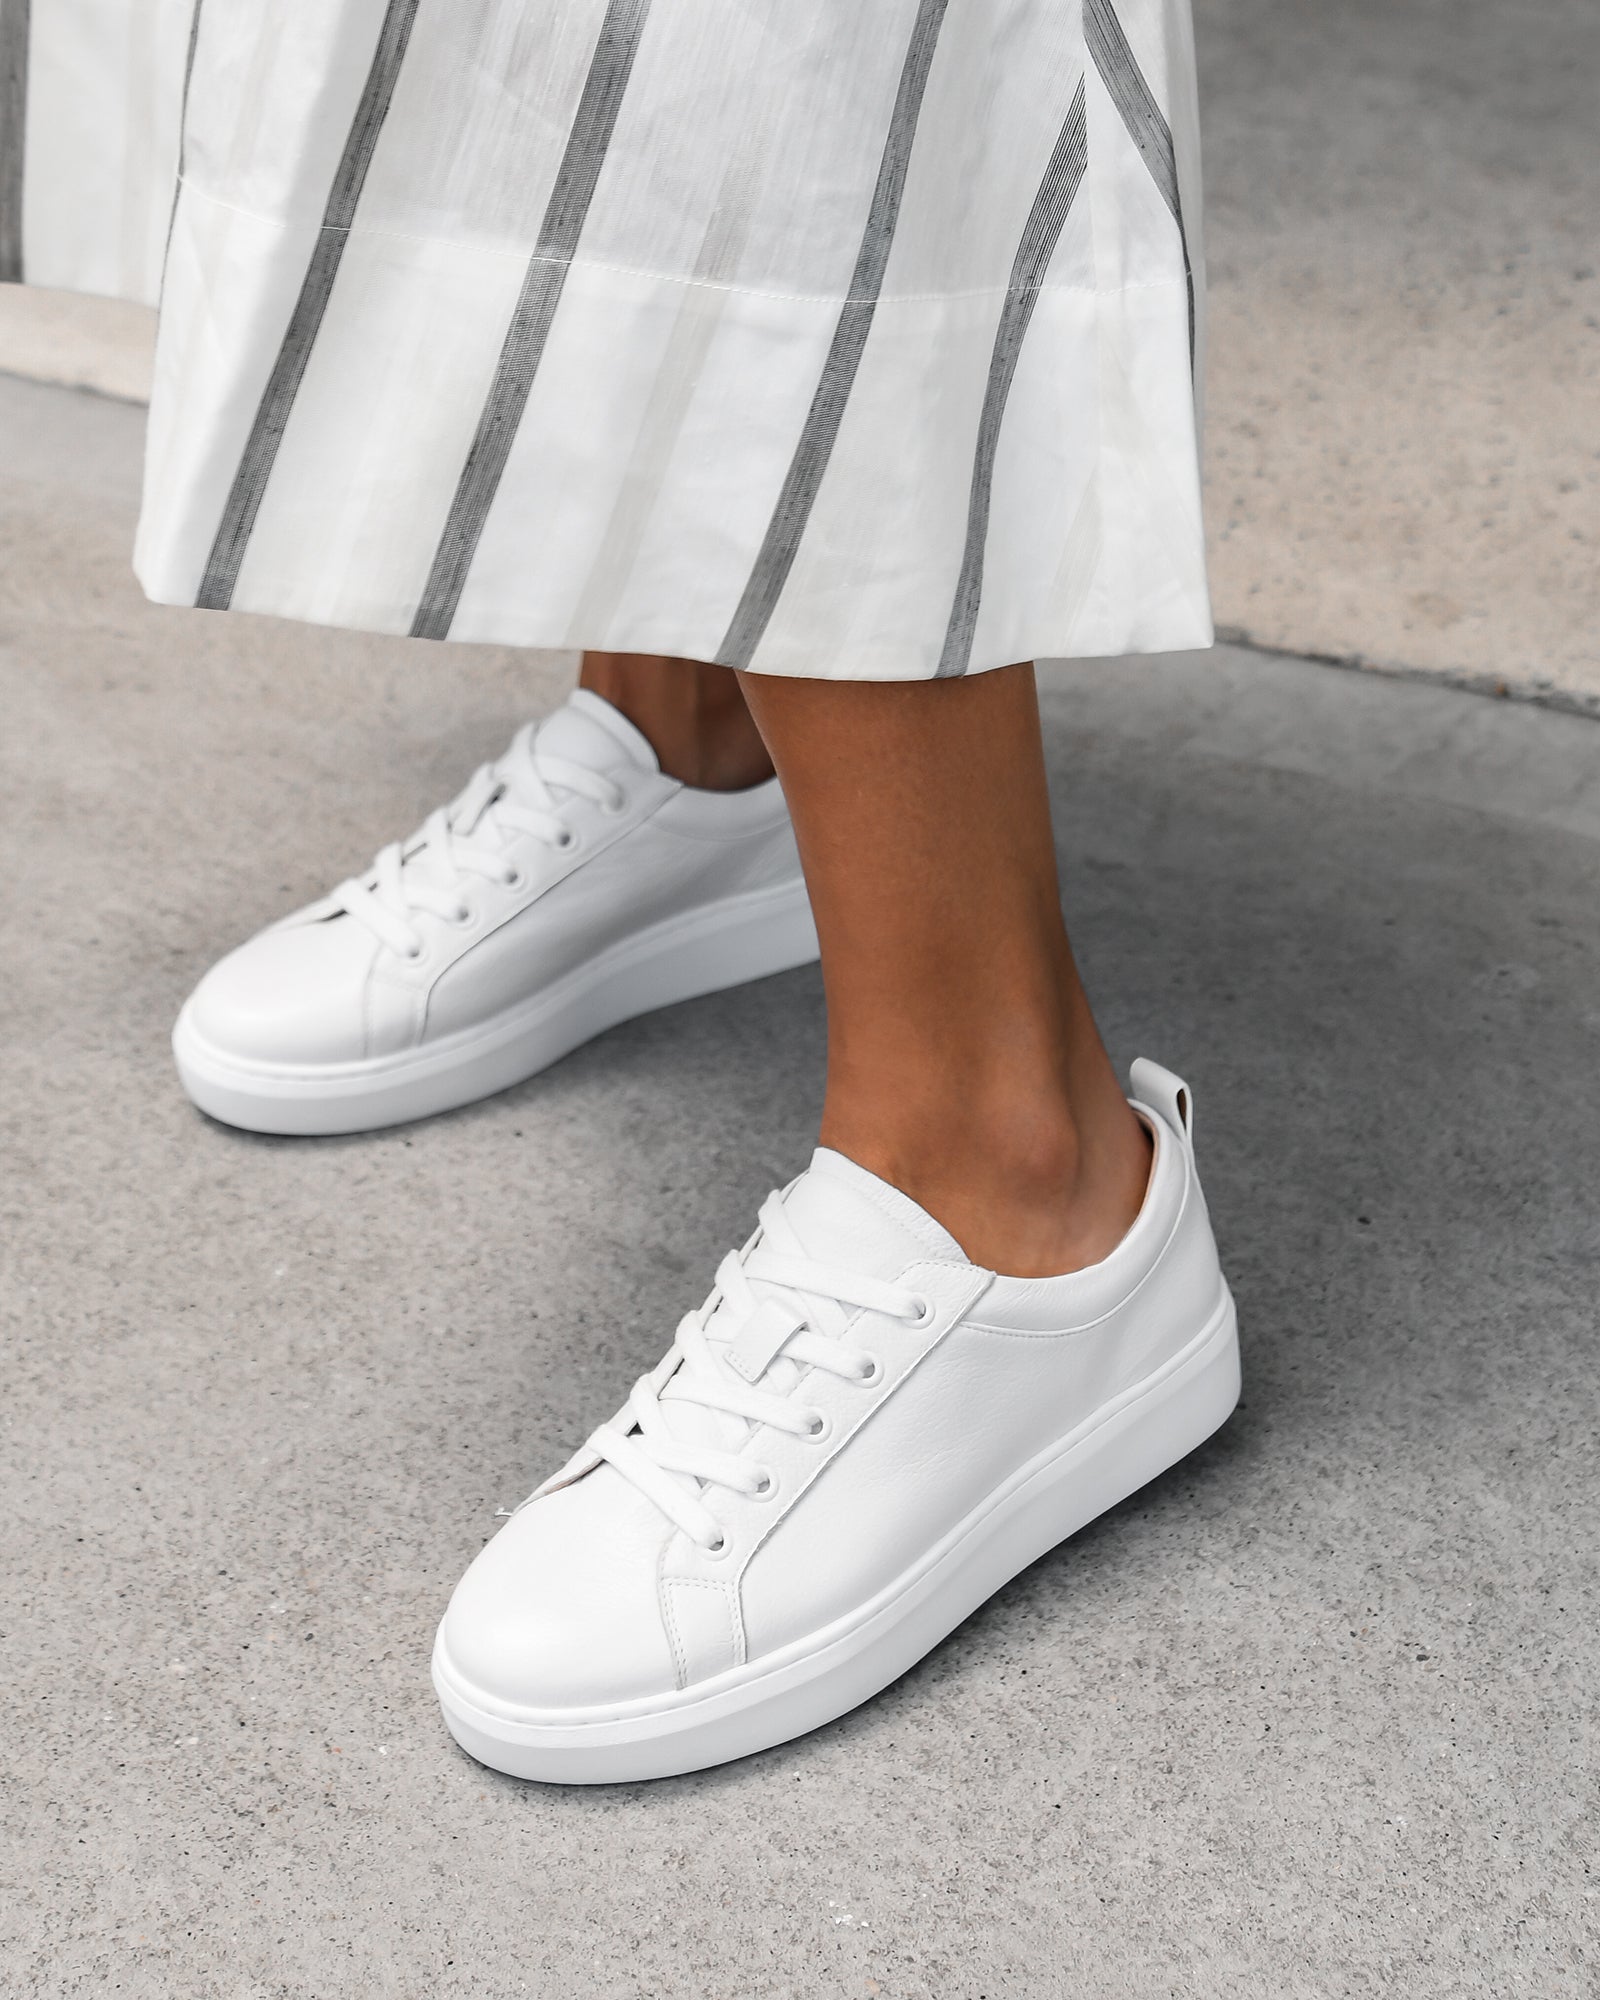 Aggregate 251+ white leather sneakers womens super hot